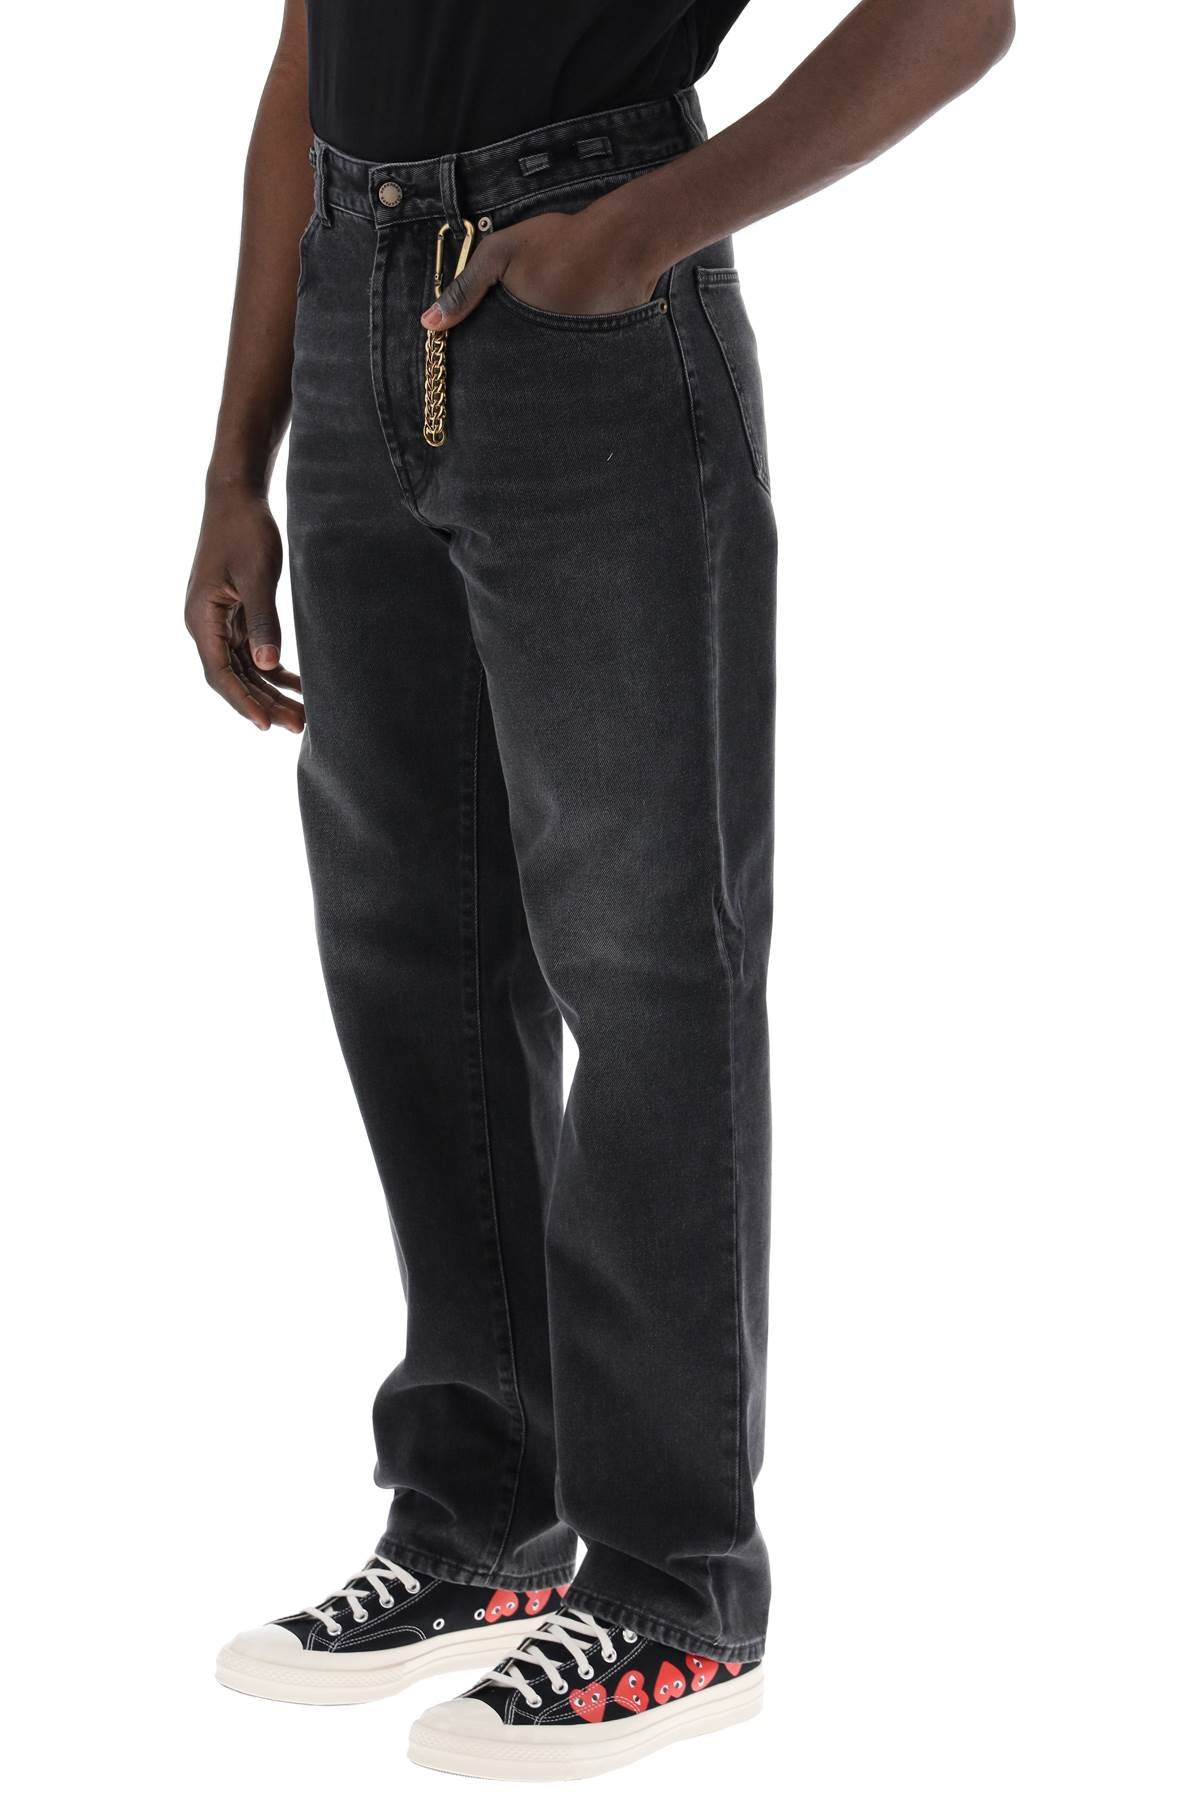 Darkpark Replace With Double Quotemark Jeans With Carabin   Black